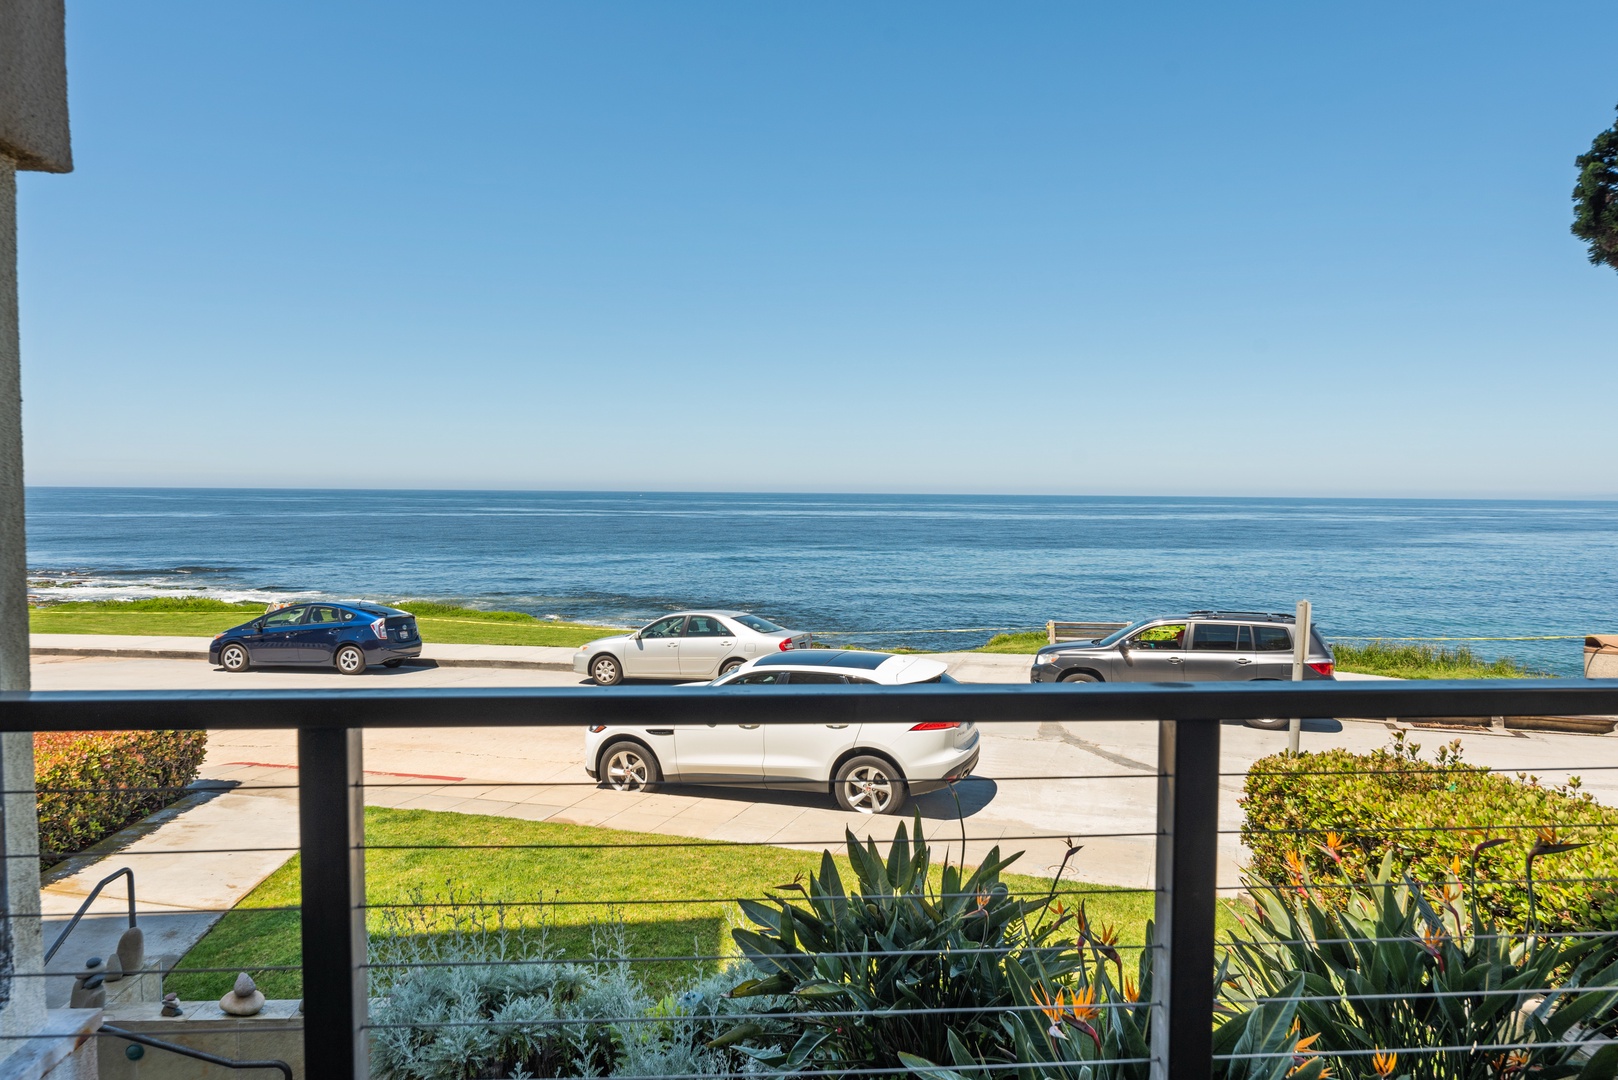 La Jolla Vacation Rentals, Oceanfront La Jolla Cove Condo - You can almost touch the water!